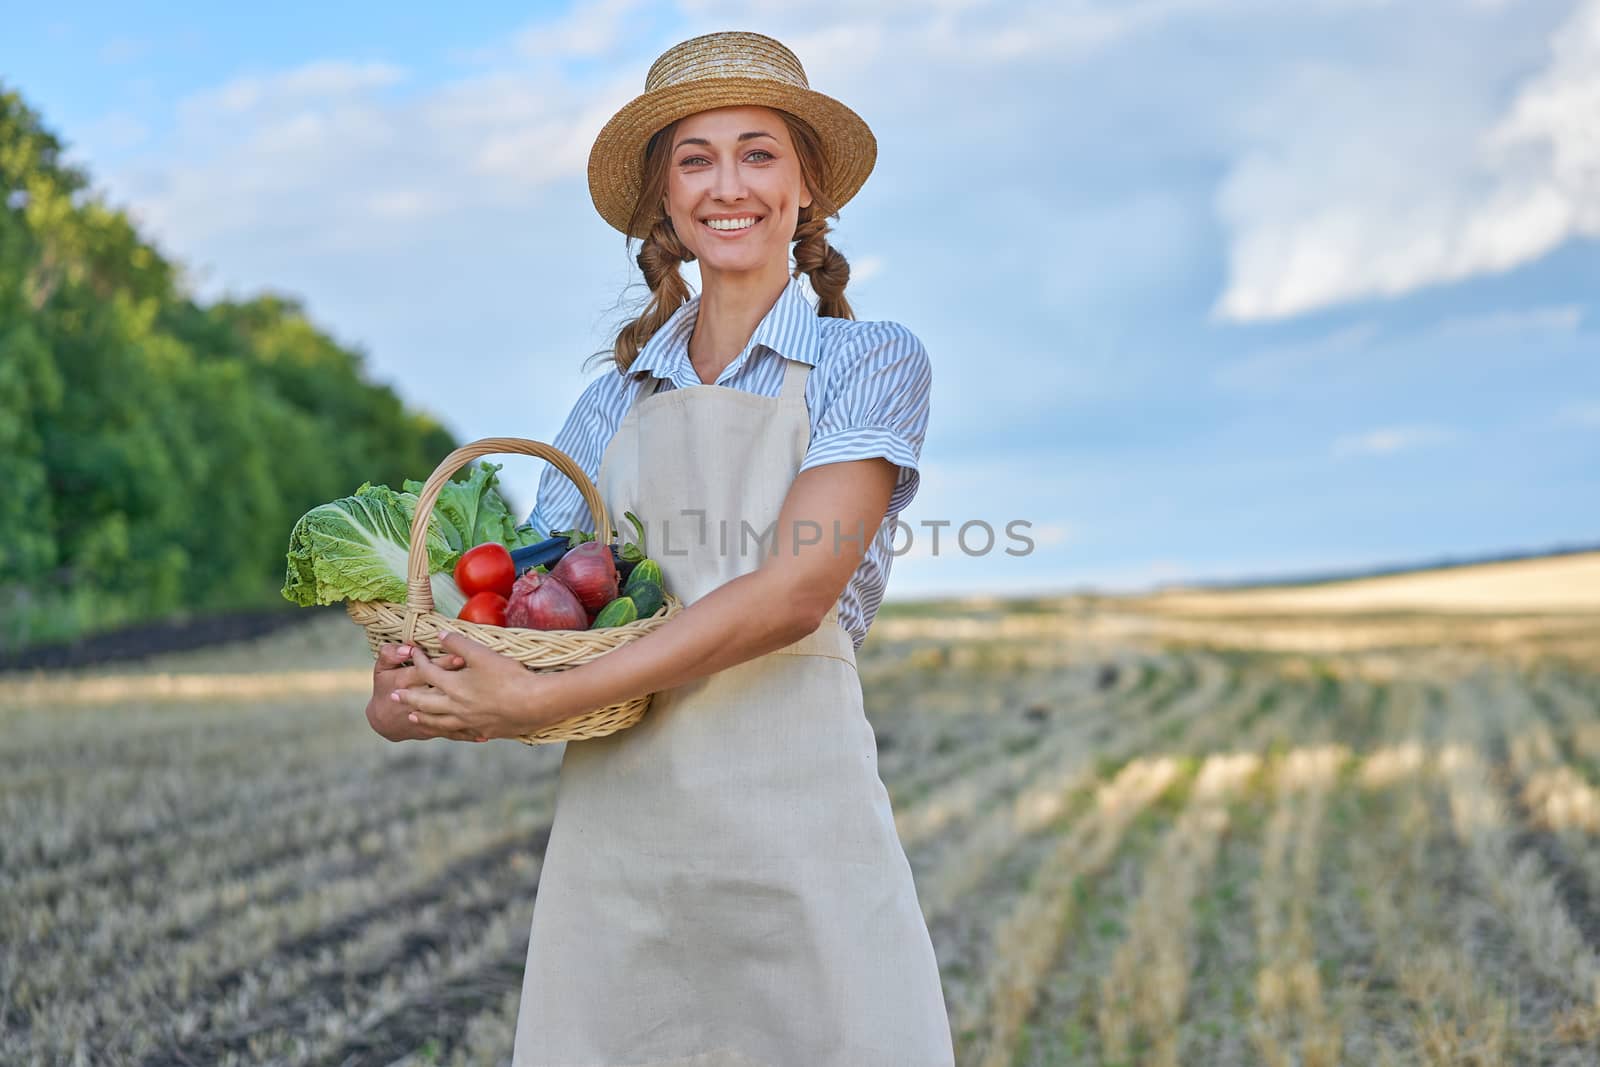 Woman farmer straw hat holding basket vegetable onion tomato salad cucumber standing farmland smiling Female agronomist specialist farming agribusiness Happy Girl dressed apron cultivated wheat field